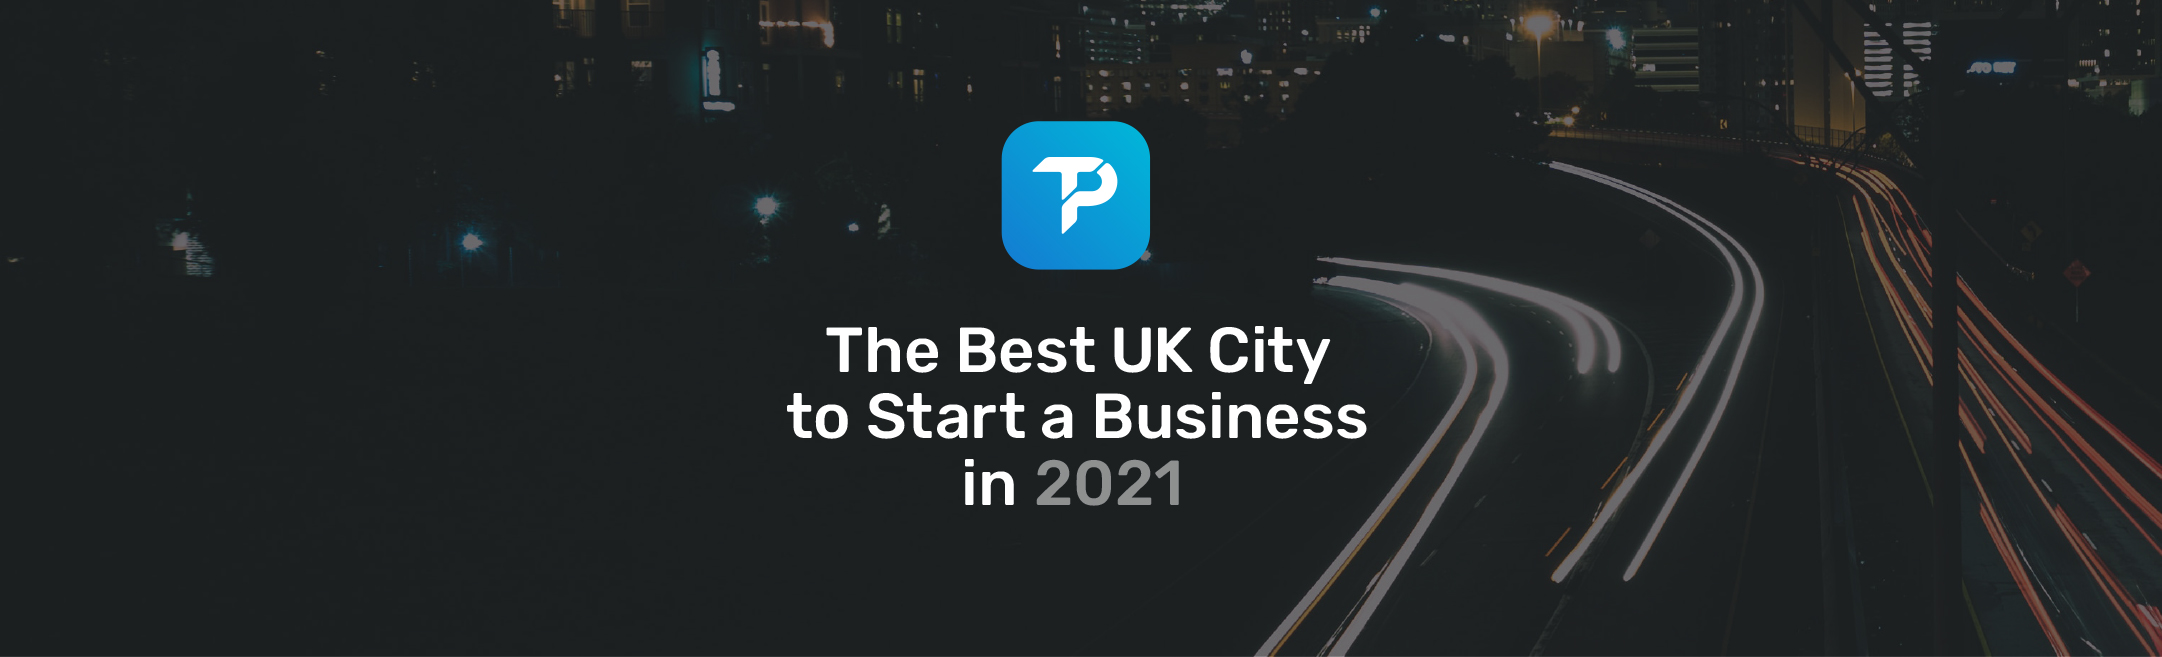 The Best UK City to Set up a Business in 2021